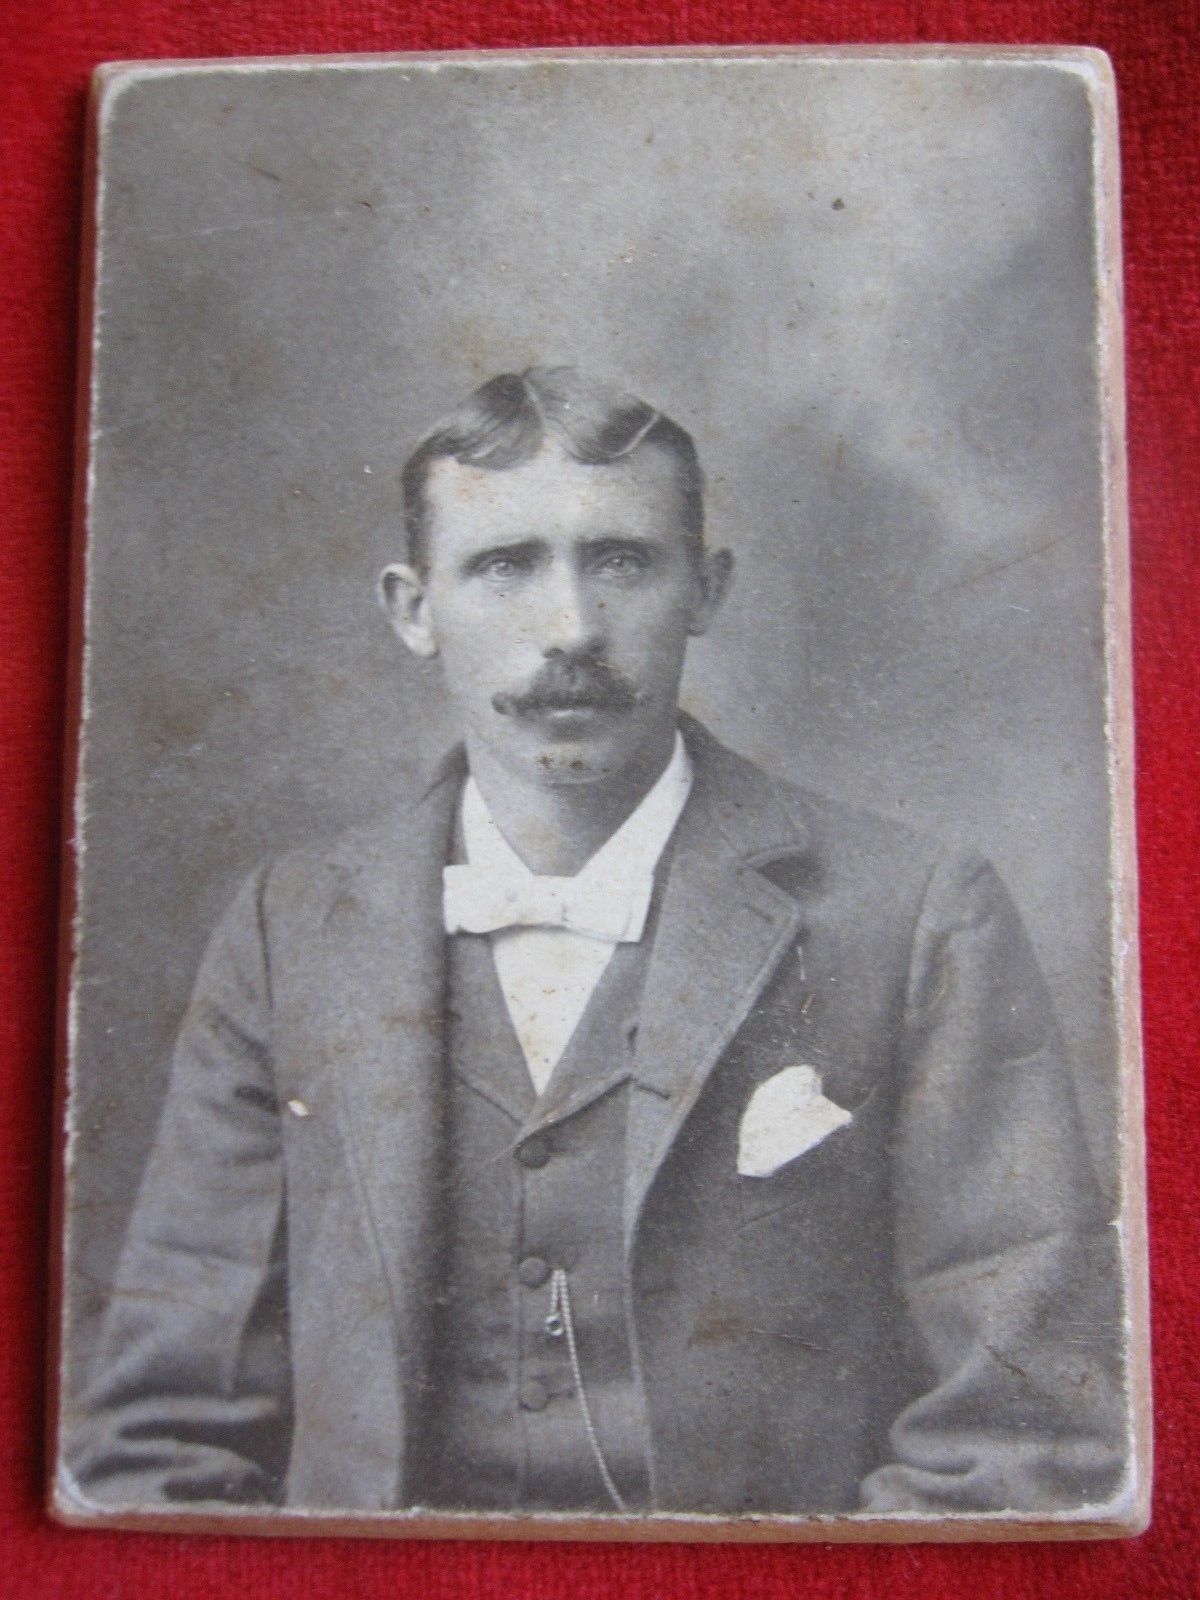 Primary image for Vintage Real  Photo of a Man 1900"s On a Cardboard back